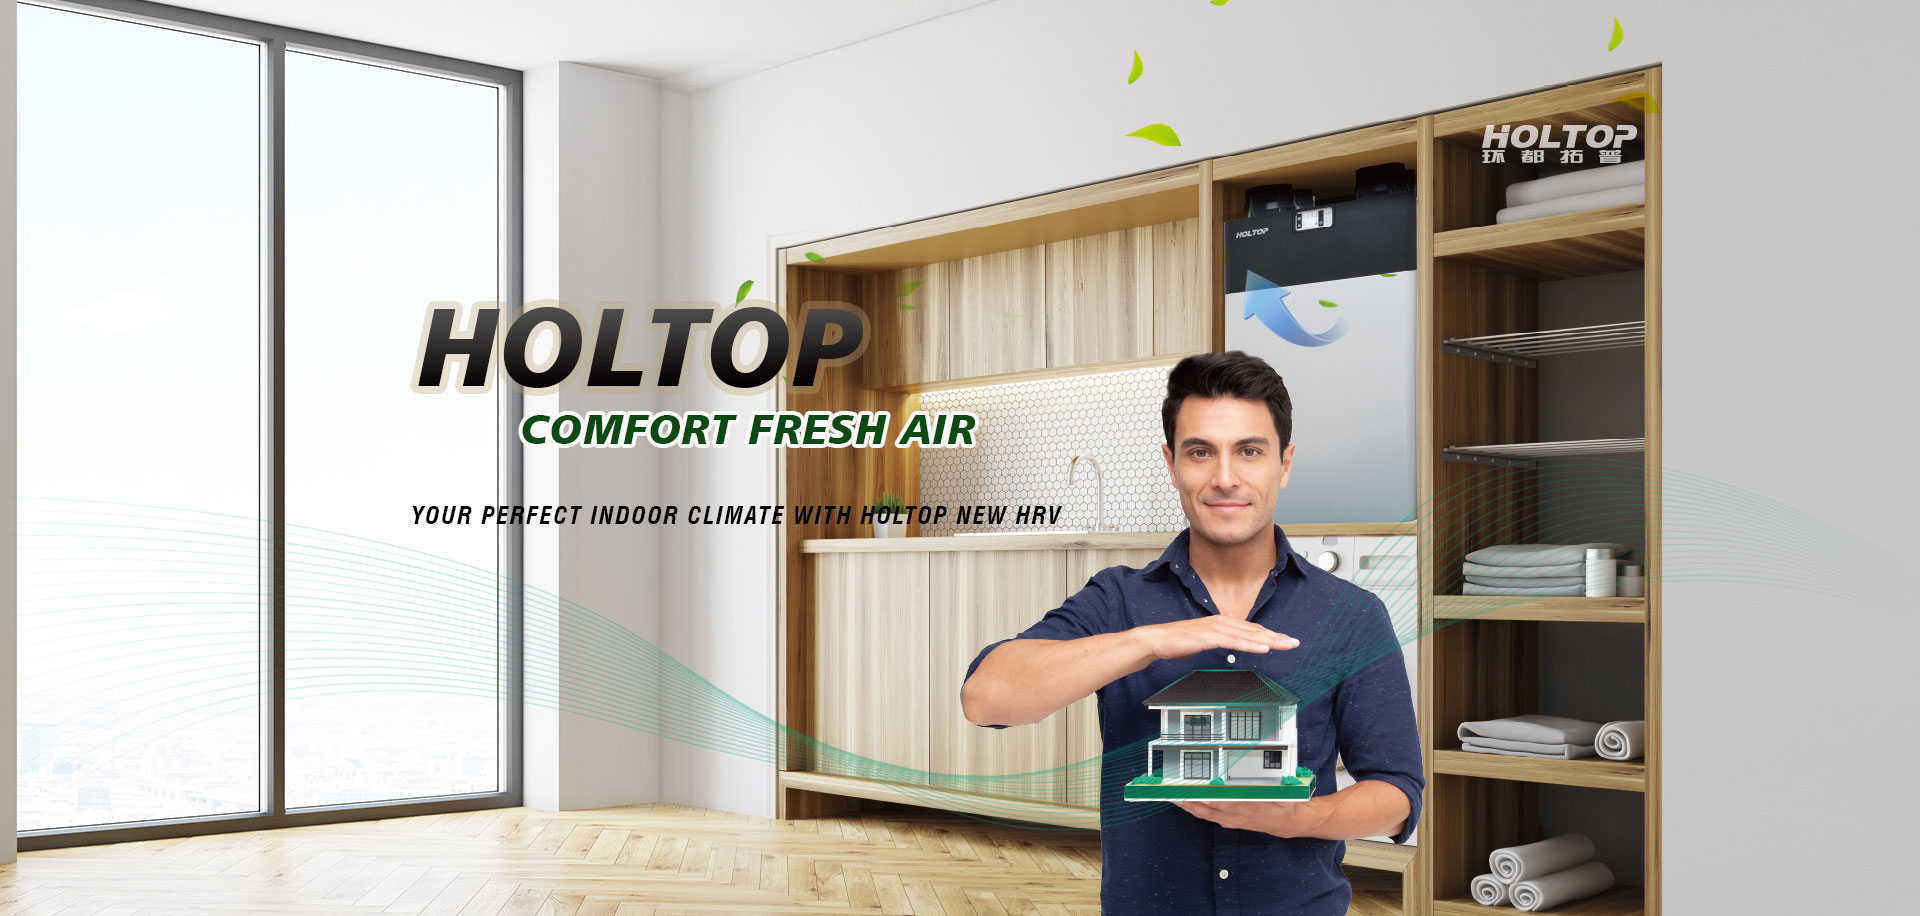 Holtop_cfa_series_hrv_Comfort_Fresh_Air_Series-heat-recovery-ventilation-system